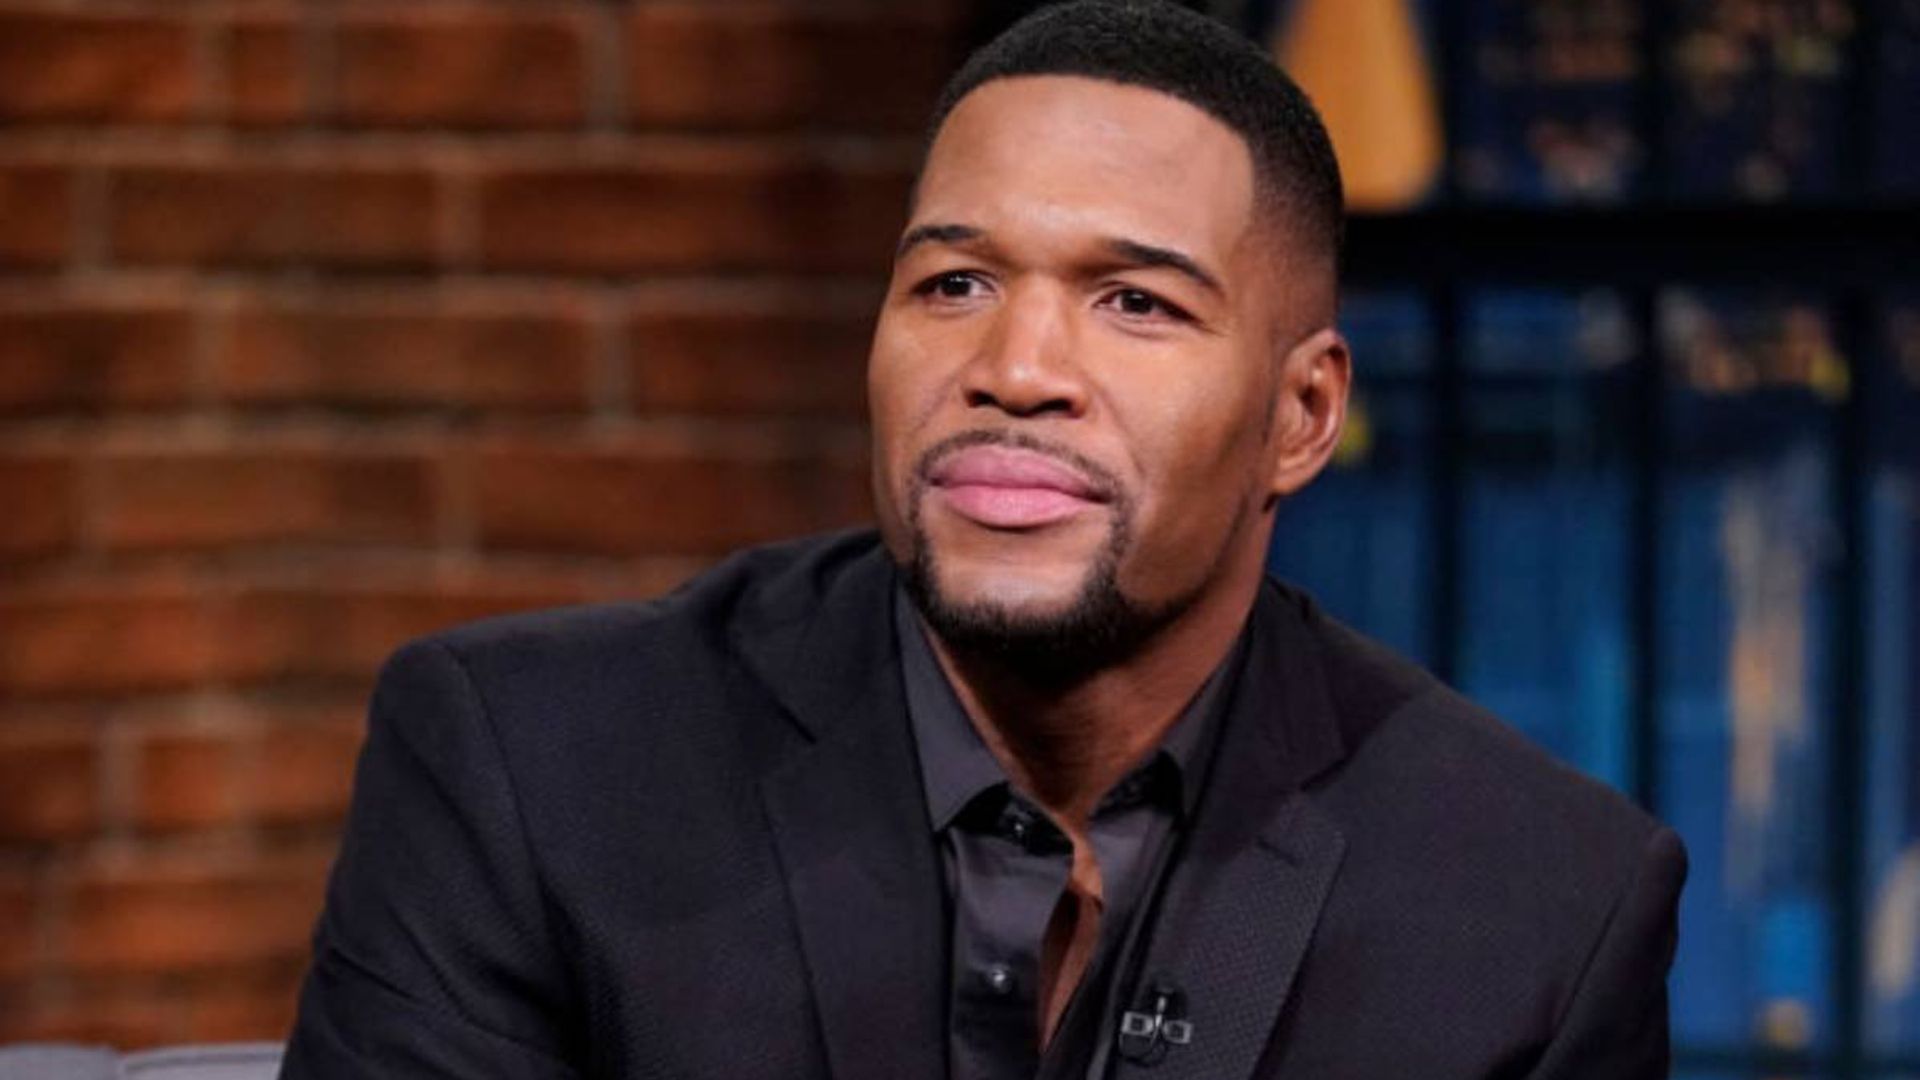 Michael Strahan looks handsome on late night TV